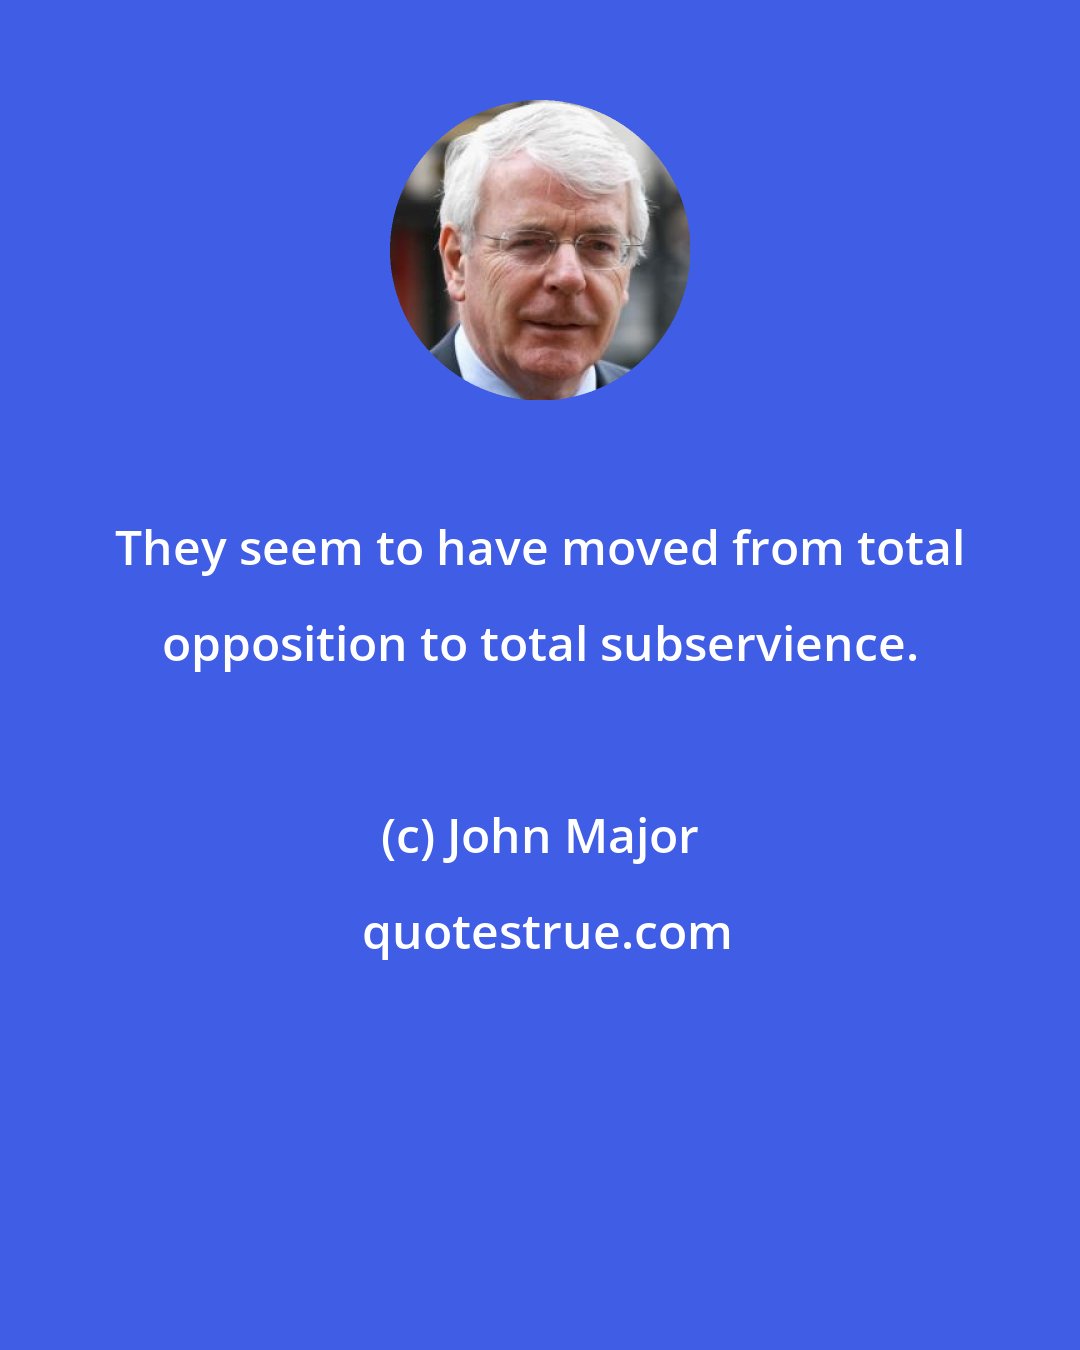 John Major: They seem to have moved from total opposition to total subservience.